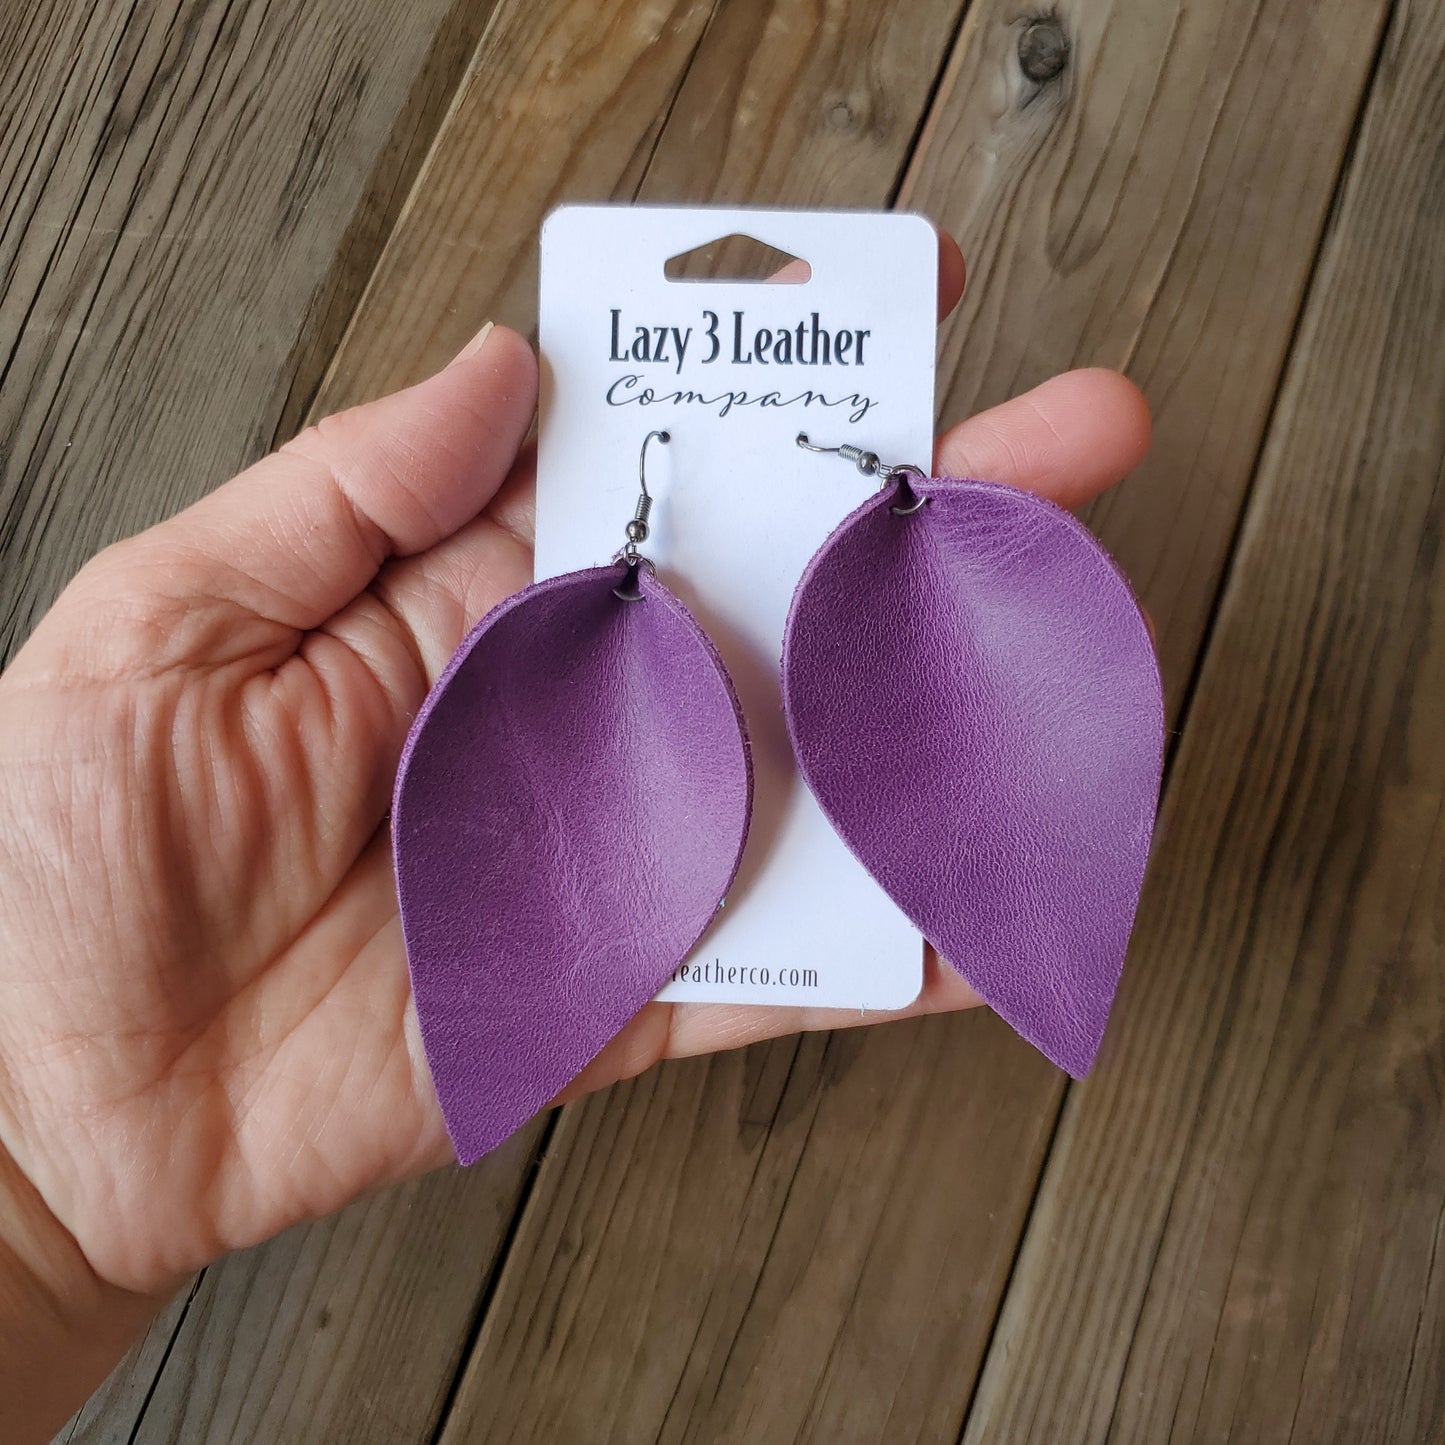 Large Hoop Leather Earrings - Lazy 3 Leather Company